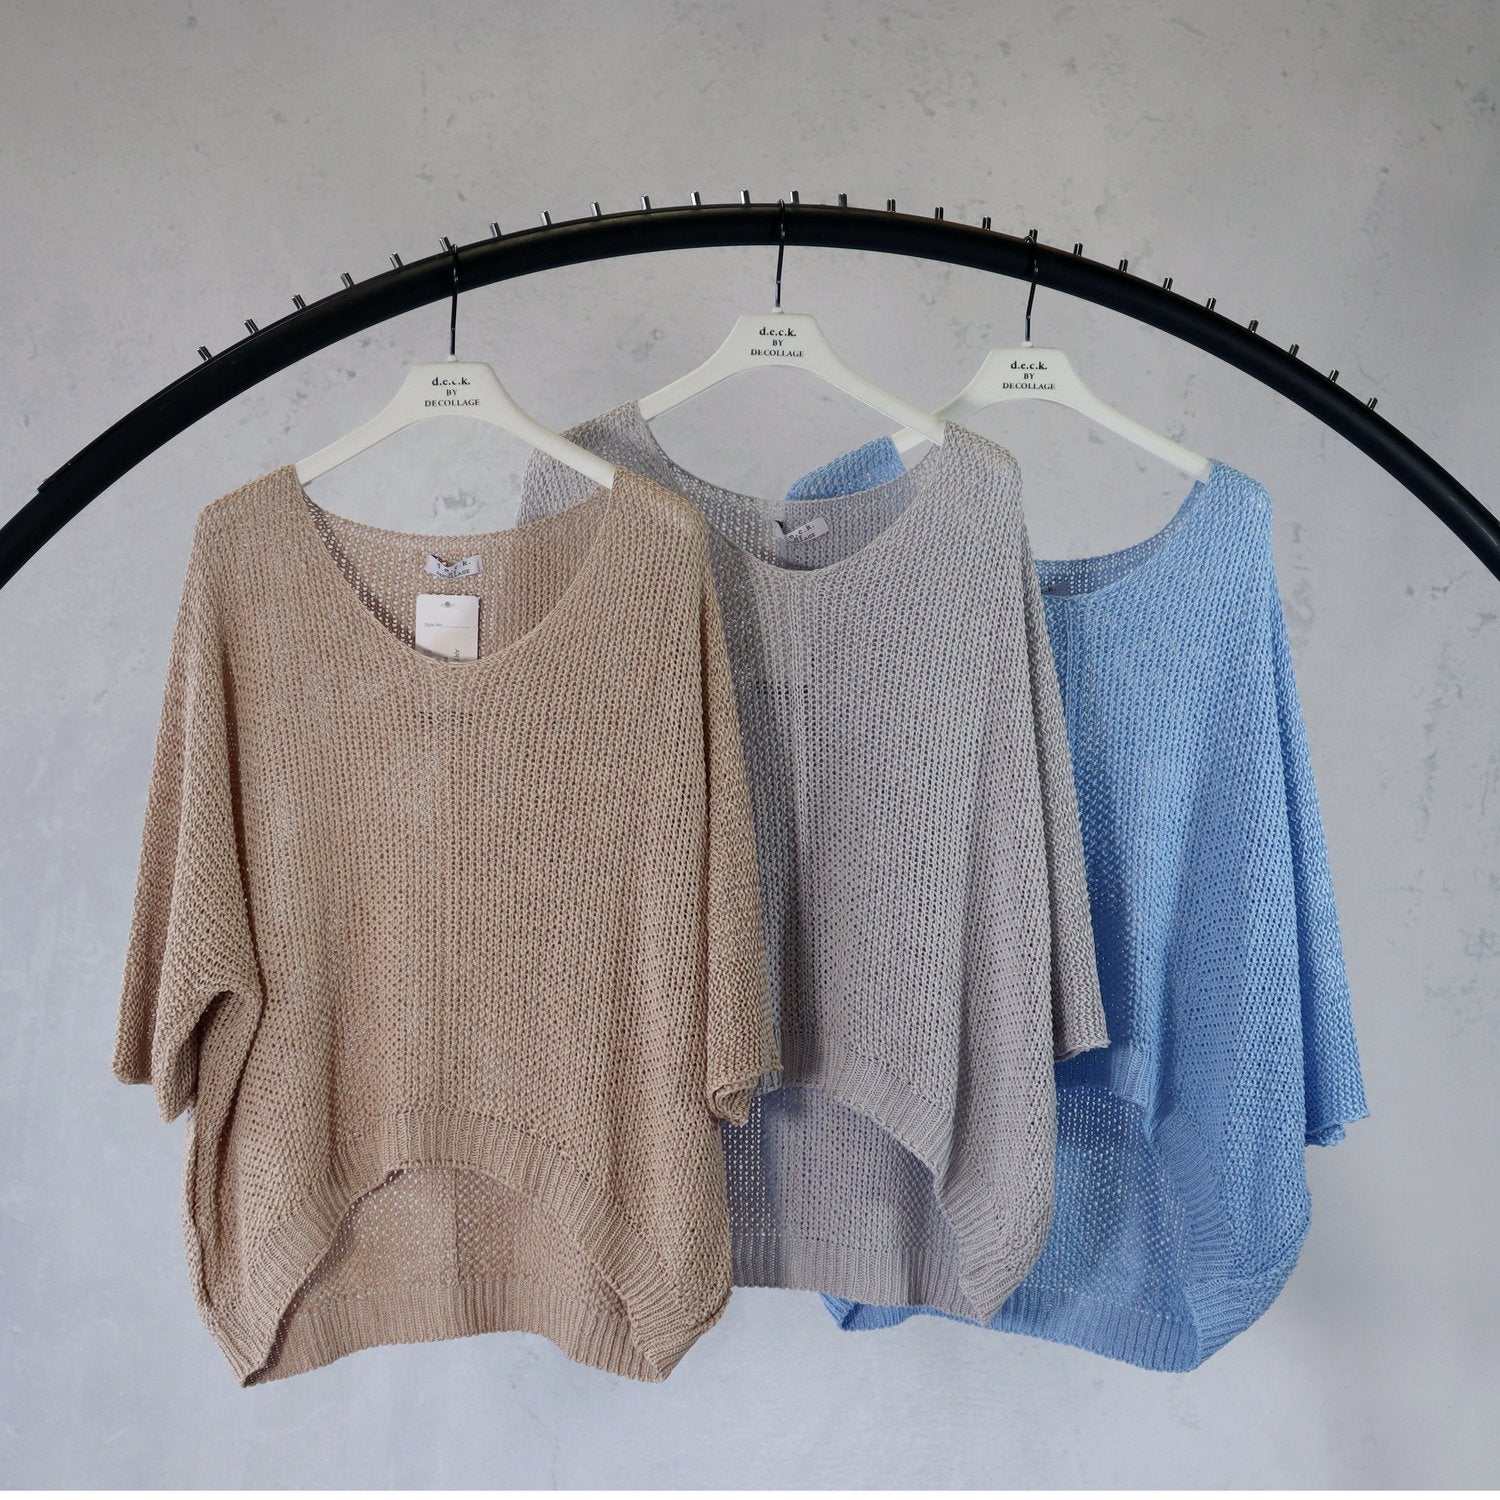 Deck Knit Top with 1/2 Length Sleeves